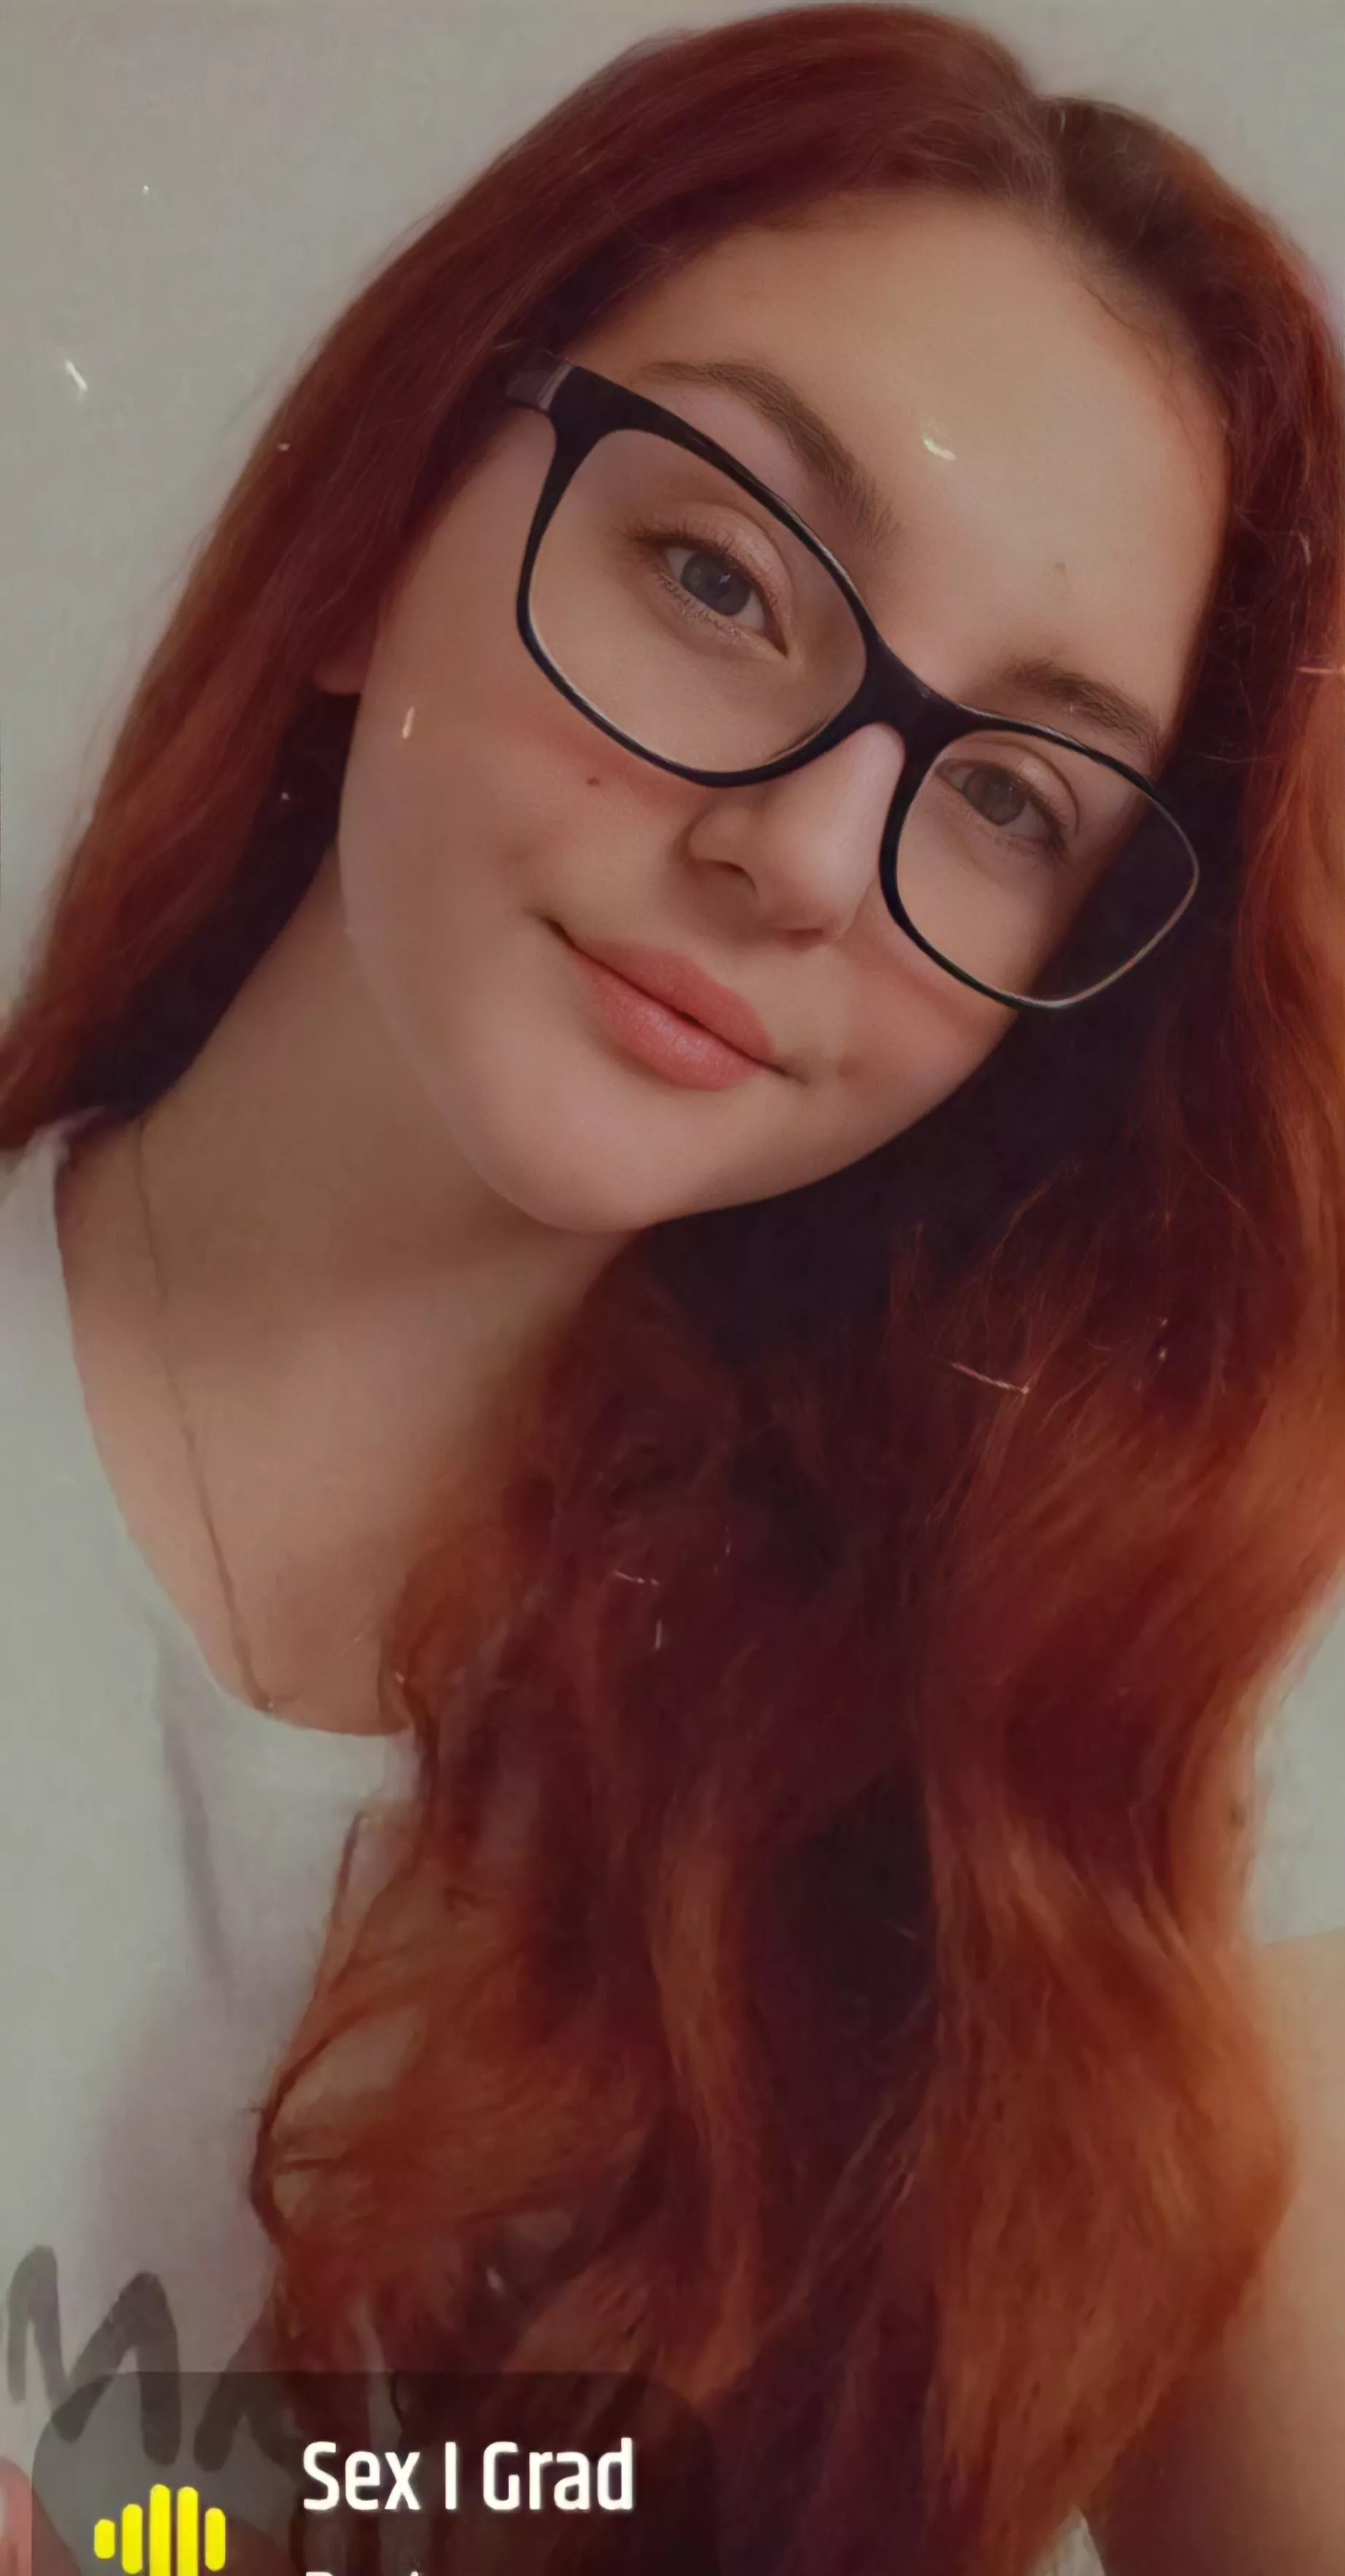 Who wants to give this beautiful redhead a facial she deserves nudes NSFW_Tributes NUDE-PICS